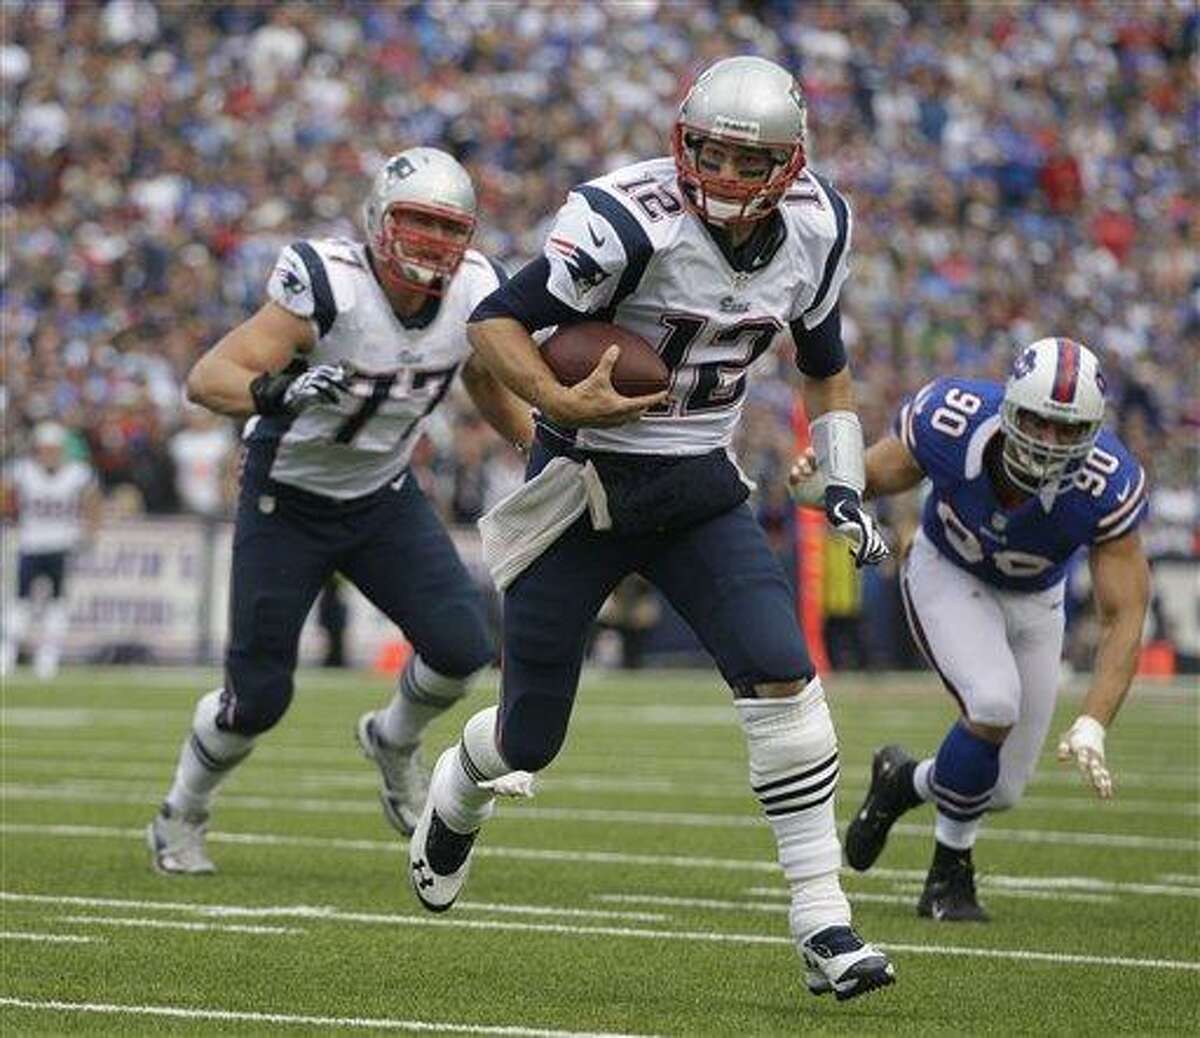 New England Patriots' Tom Brady runs for a touchdown against the Buffalo Bills during the second half of an NFL football game in Orchard Park, N.Y., Sunday, Sept. 30, 2012. (AP Photo/Gary Wiepert)